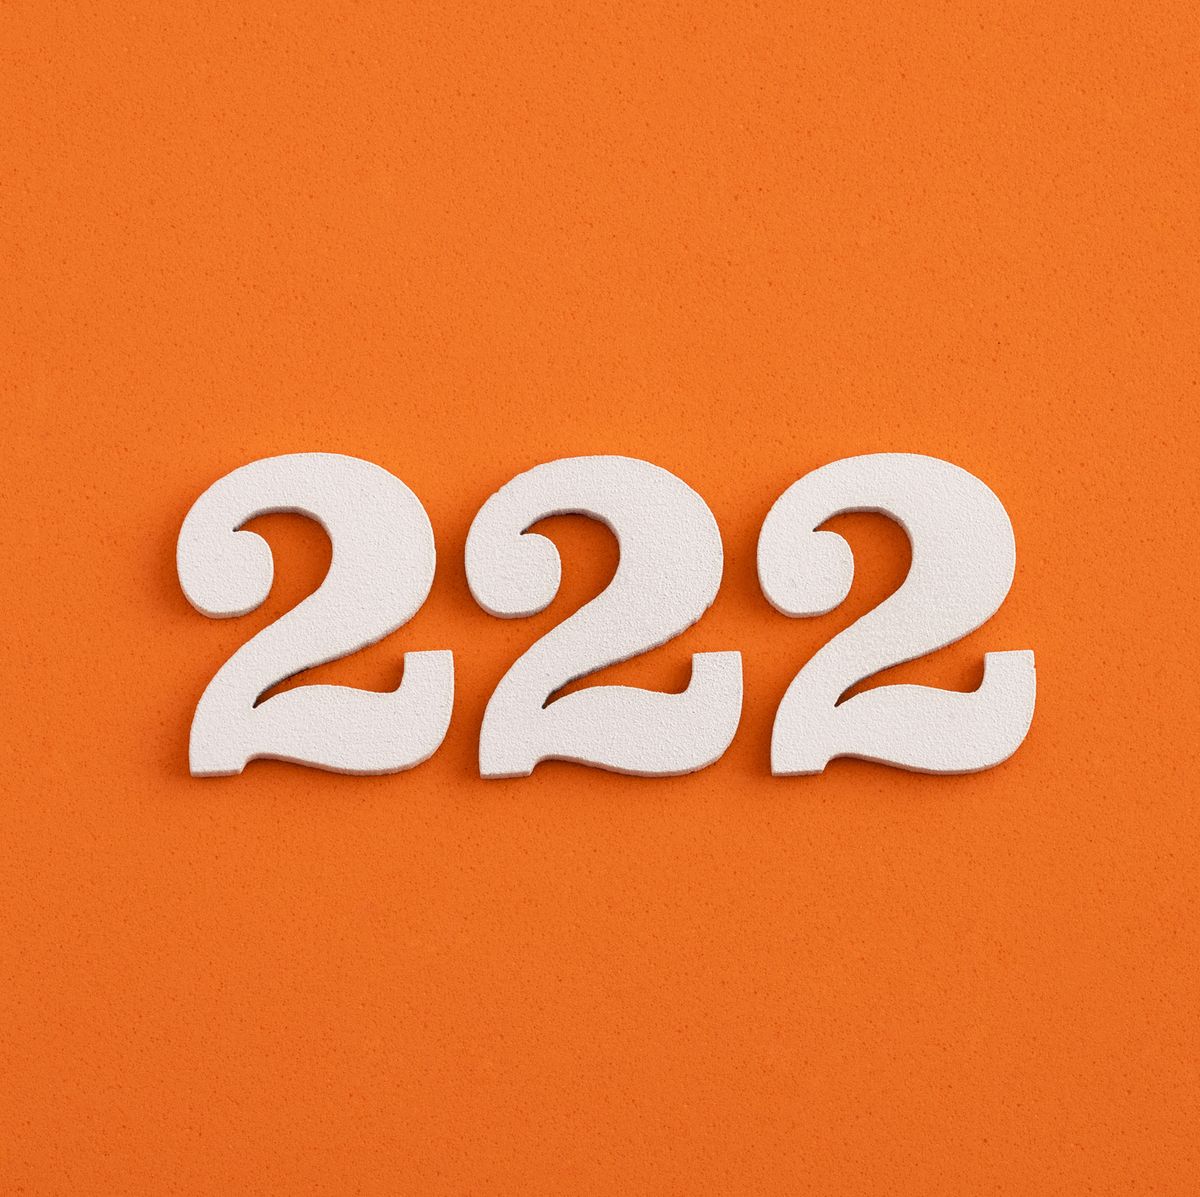 222 Angel Number Meaning in Numerology, Love and Career